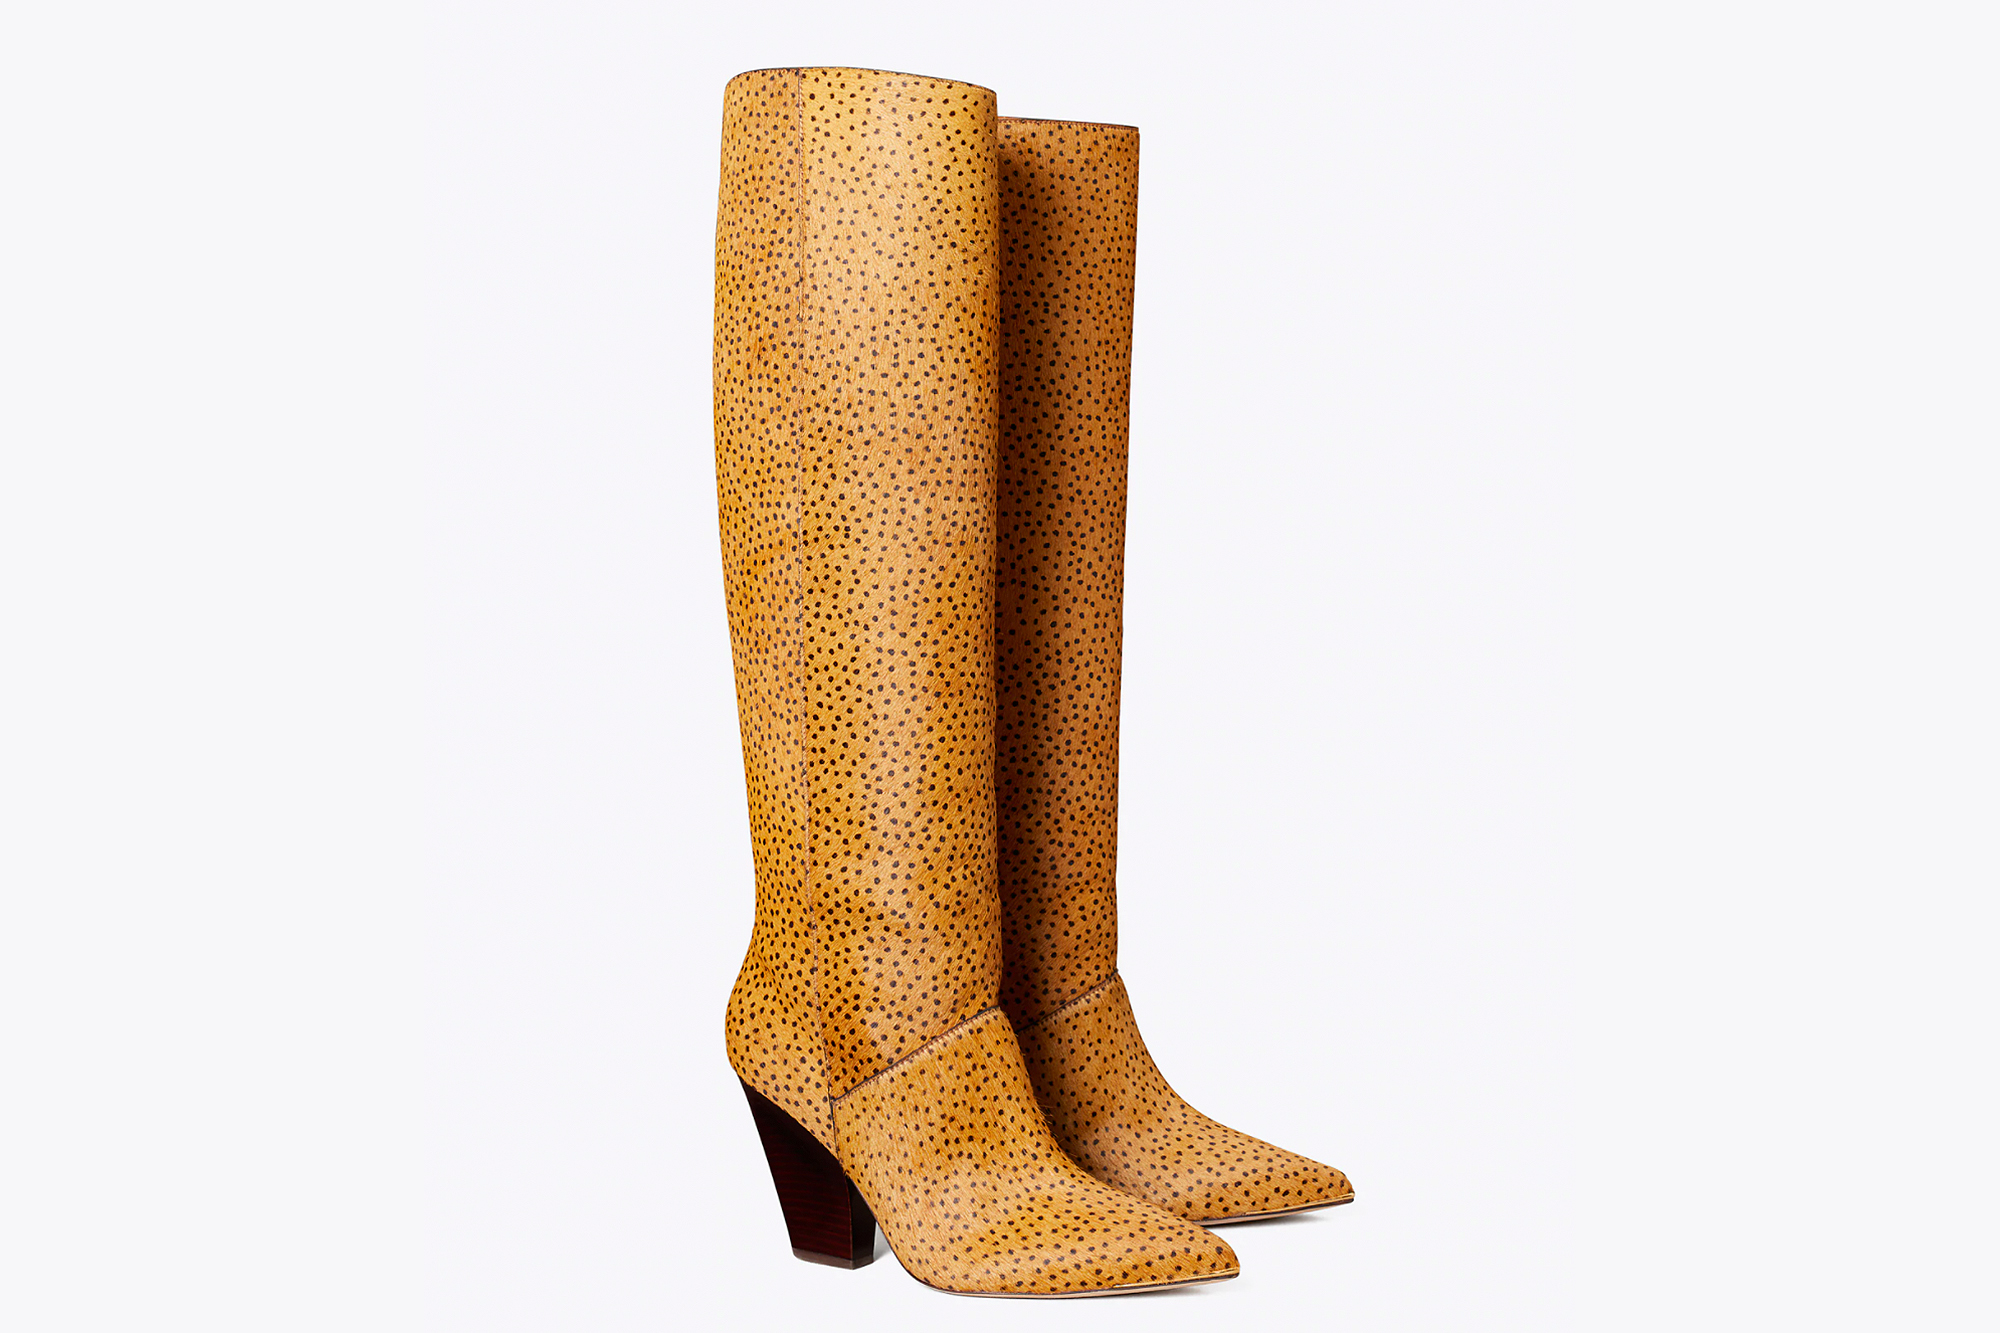 Stunning Tory Burch Boots Are on Sale Right Now — 30% Off!